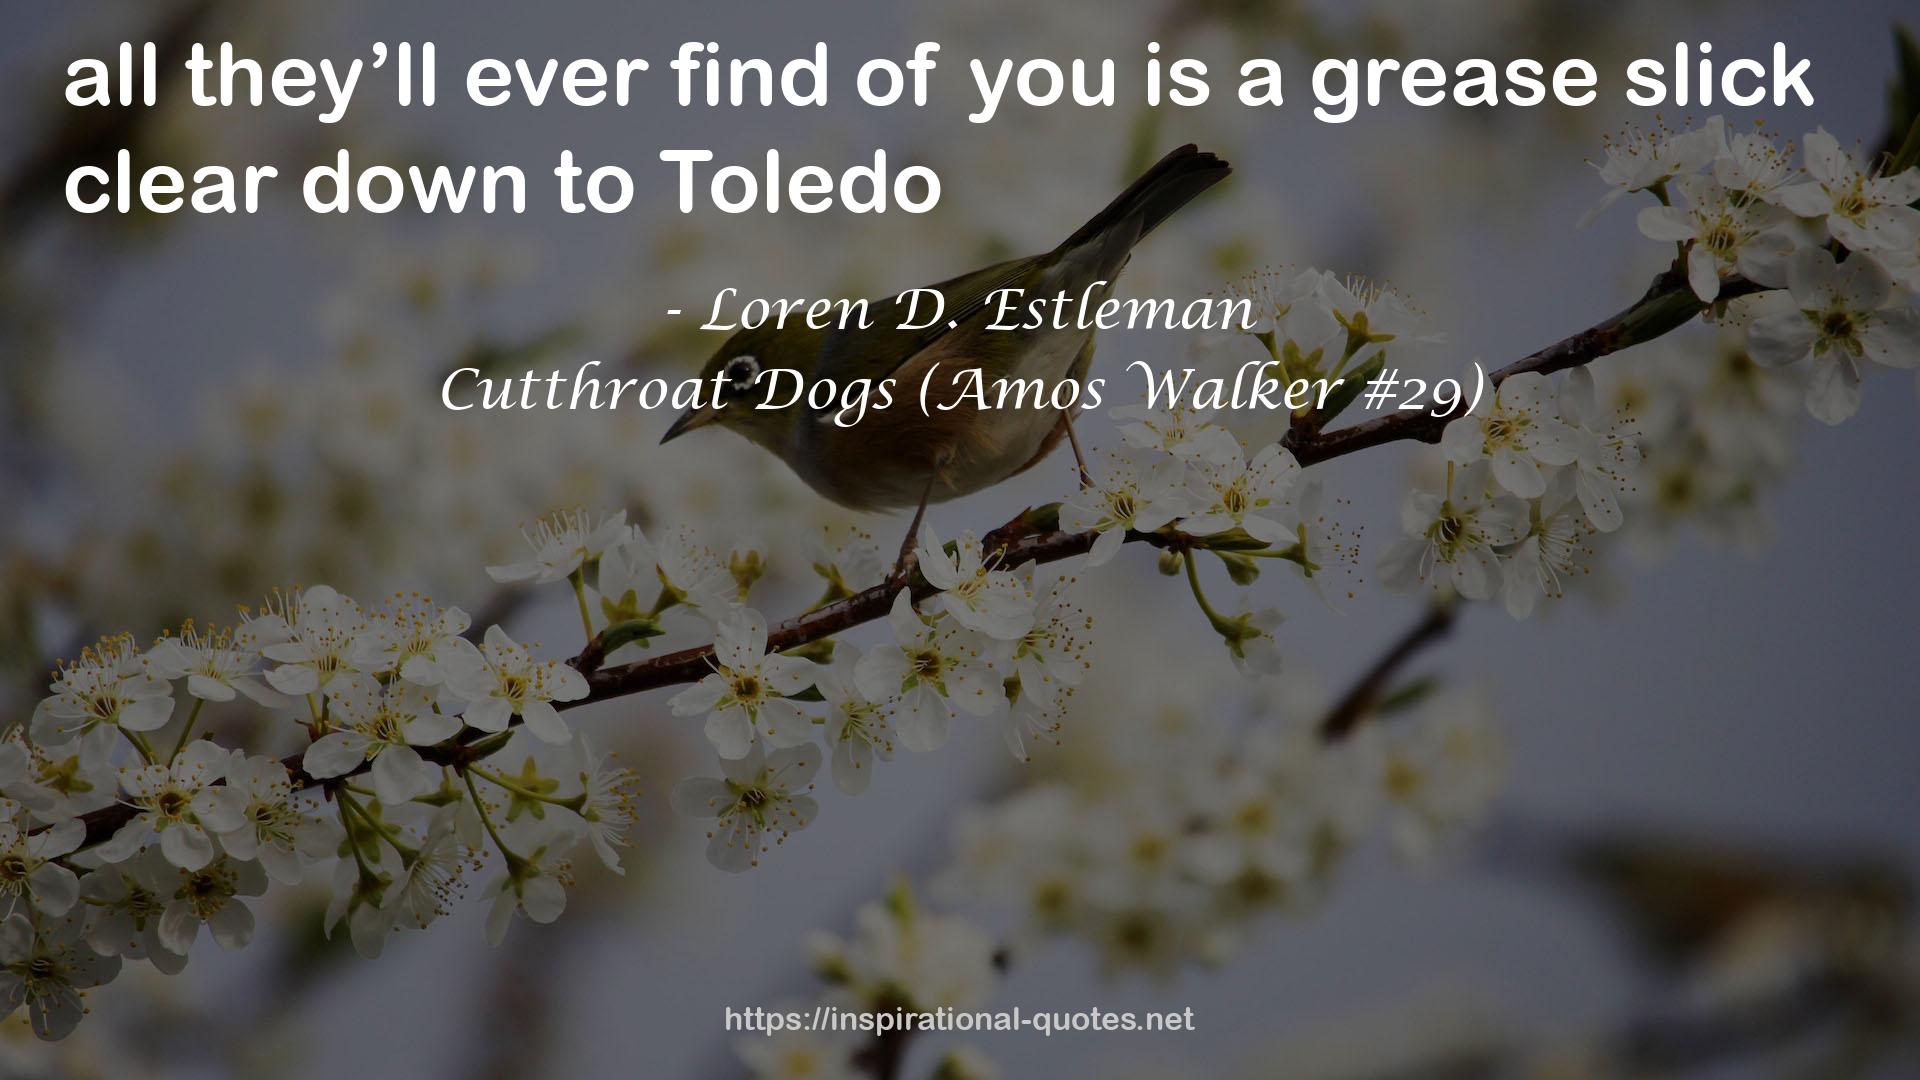 Cutthroat Dogs (Amos Walker #29) QUOTES